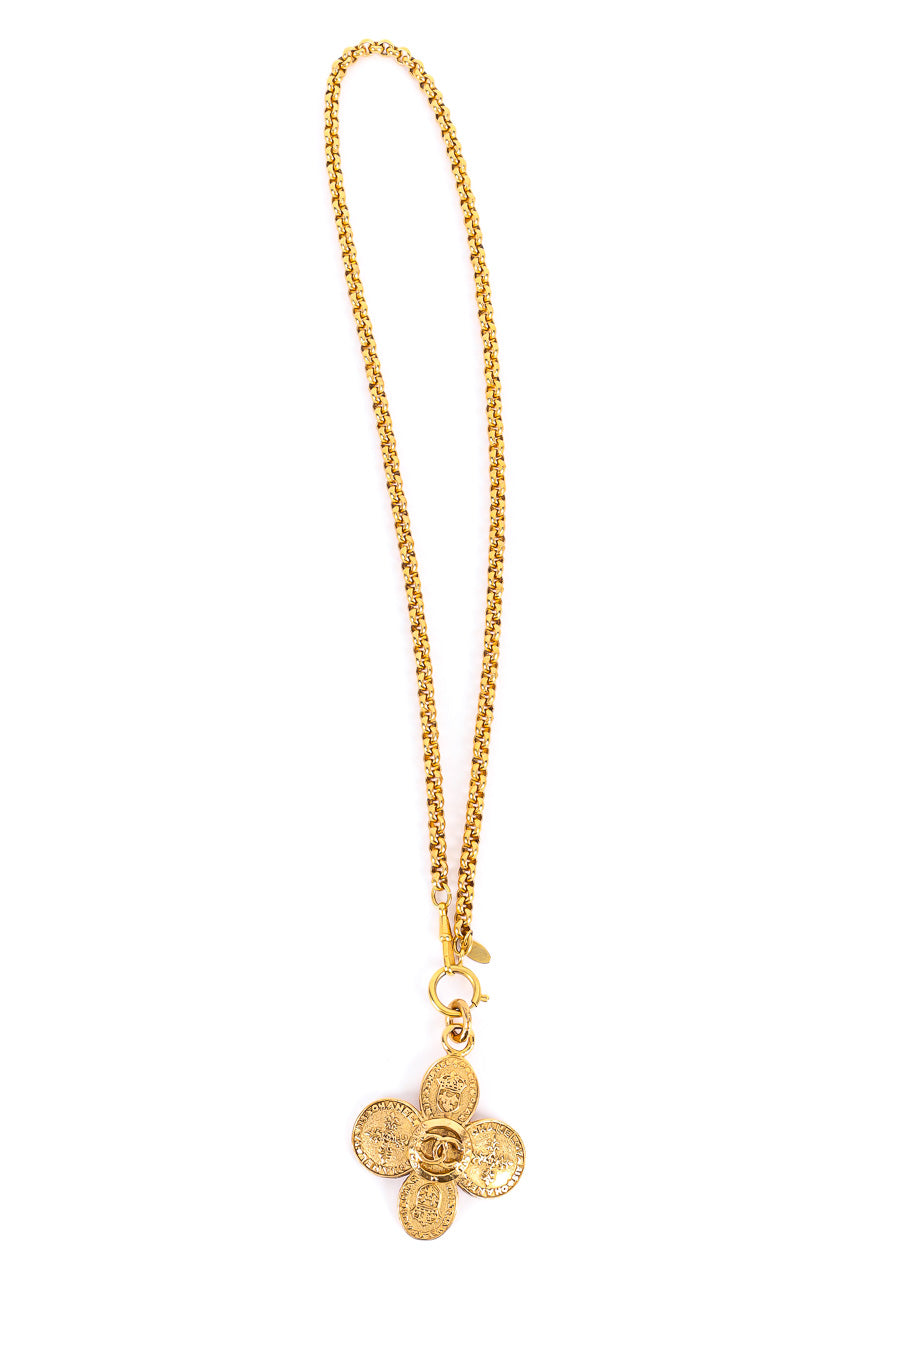 Clover Crest Cross Pendant Necklace by Chanel flat lay @recessla